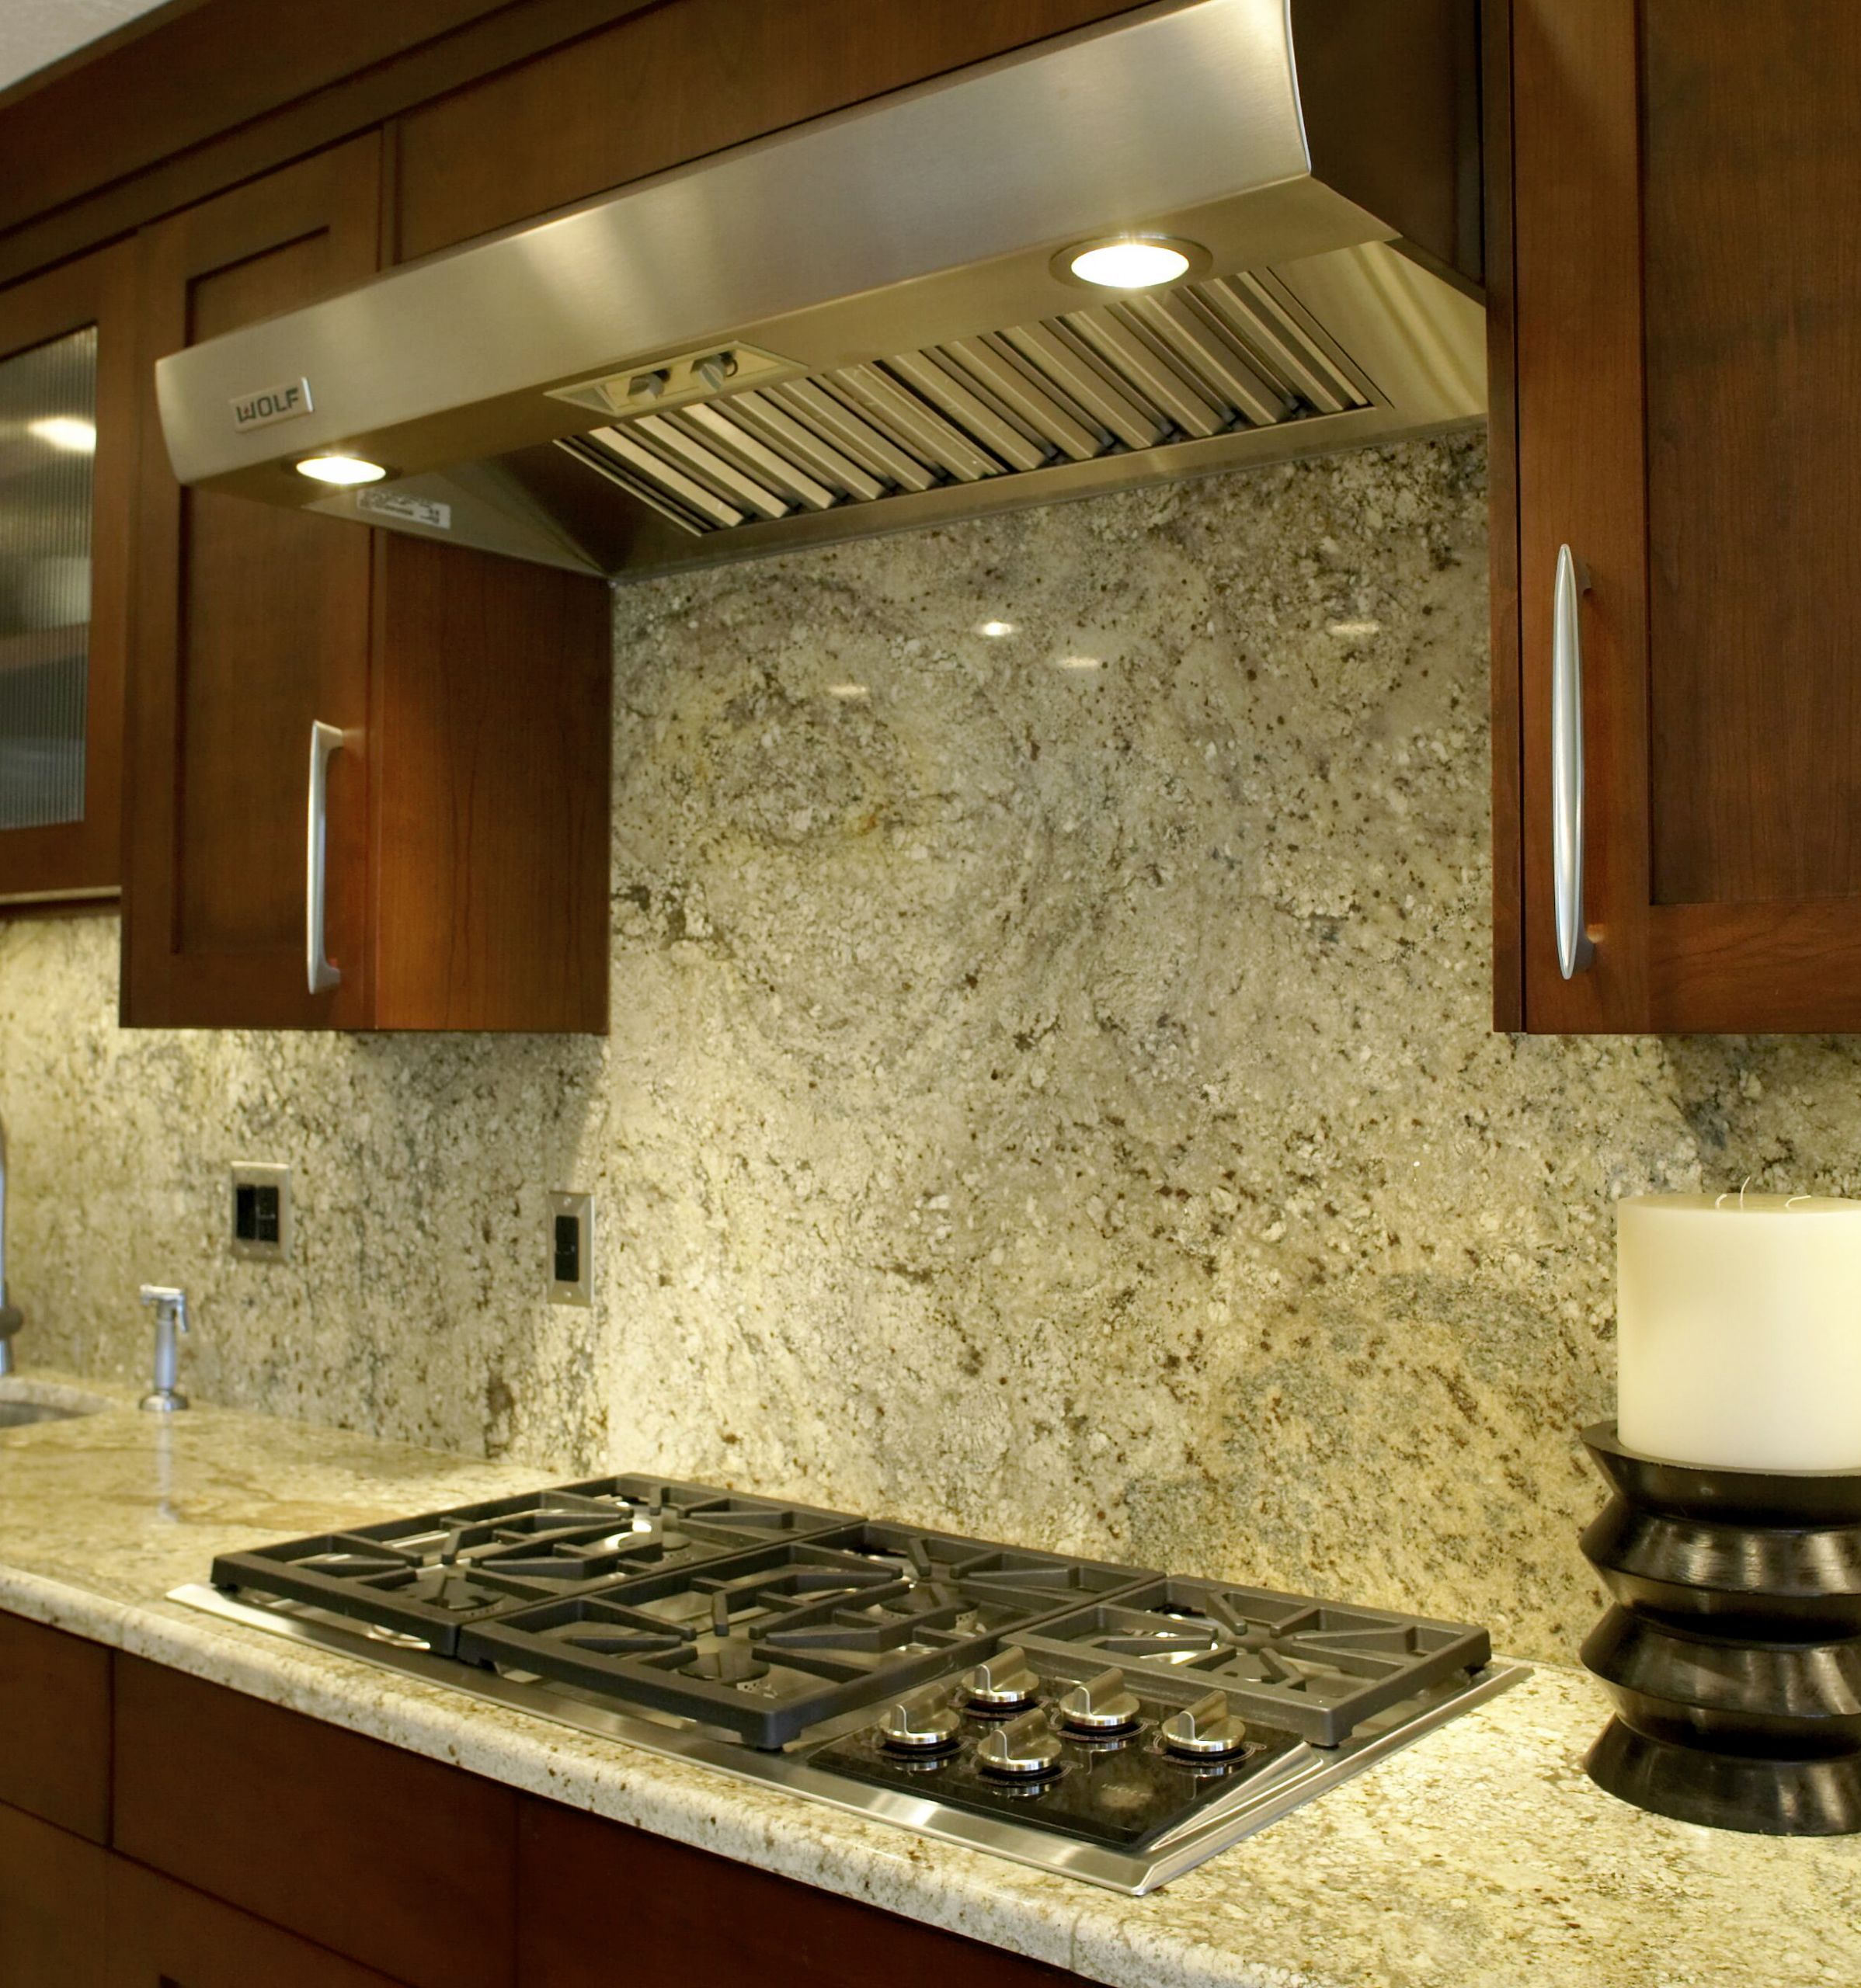 Kitchen Counter And Backsplash Photos
 Are backsplashes important in a kitchen